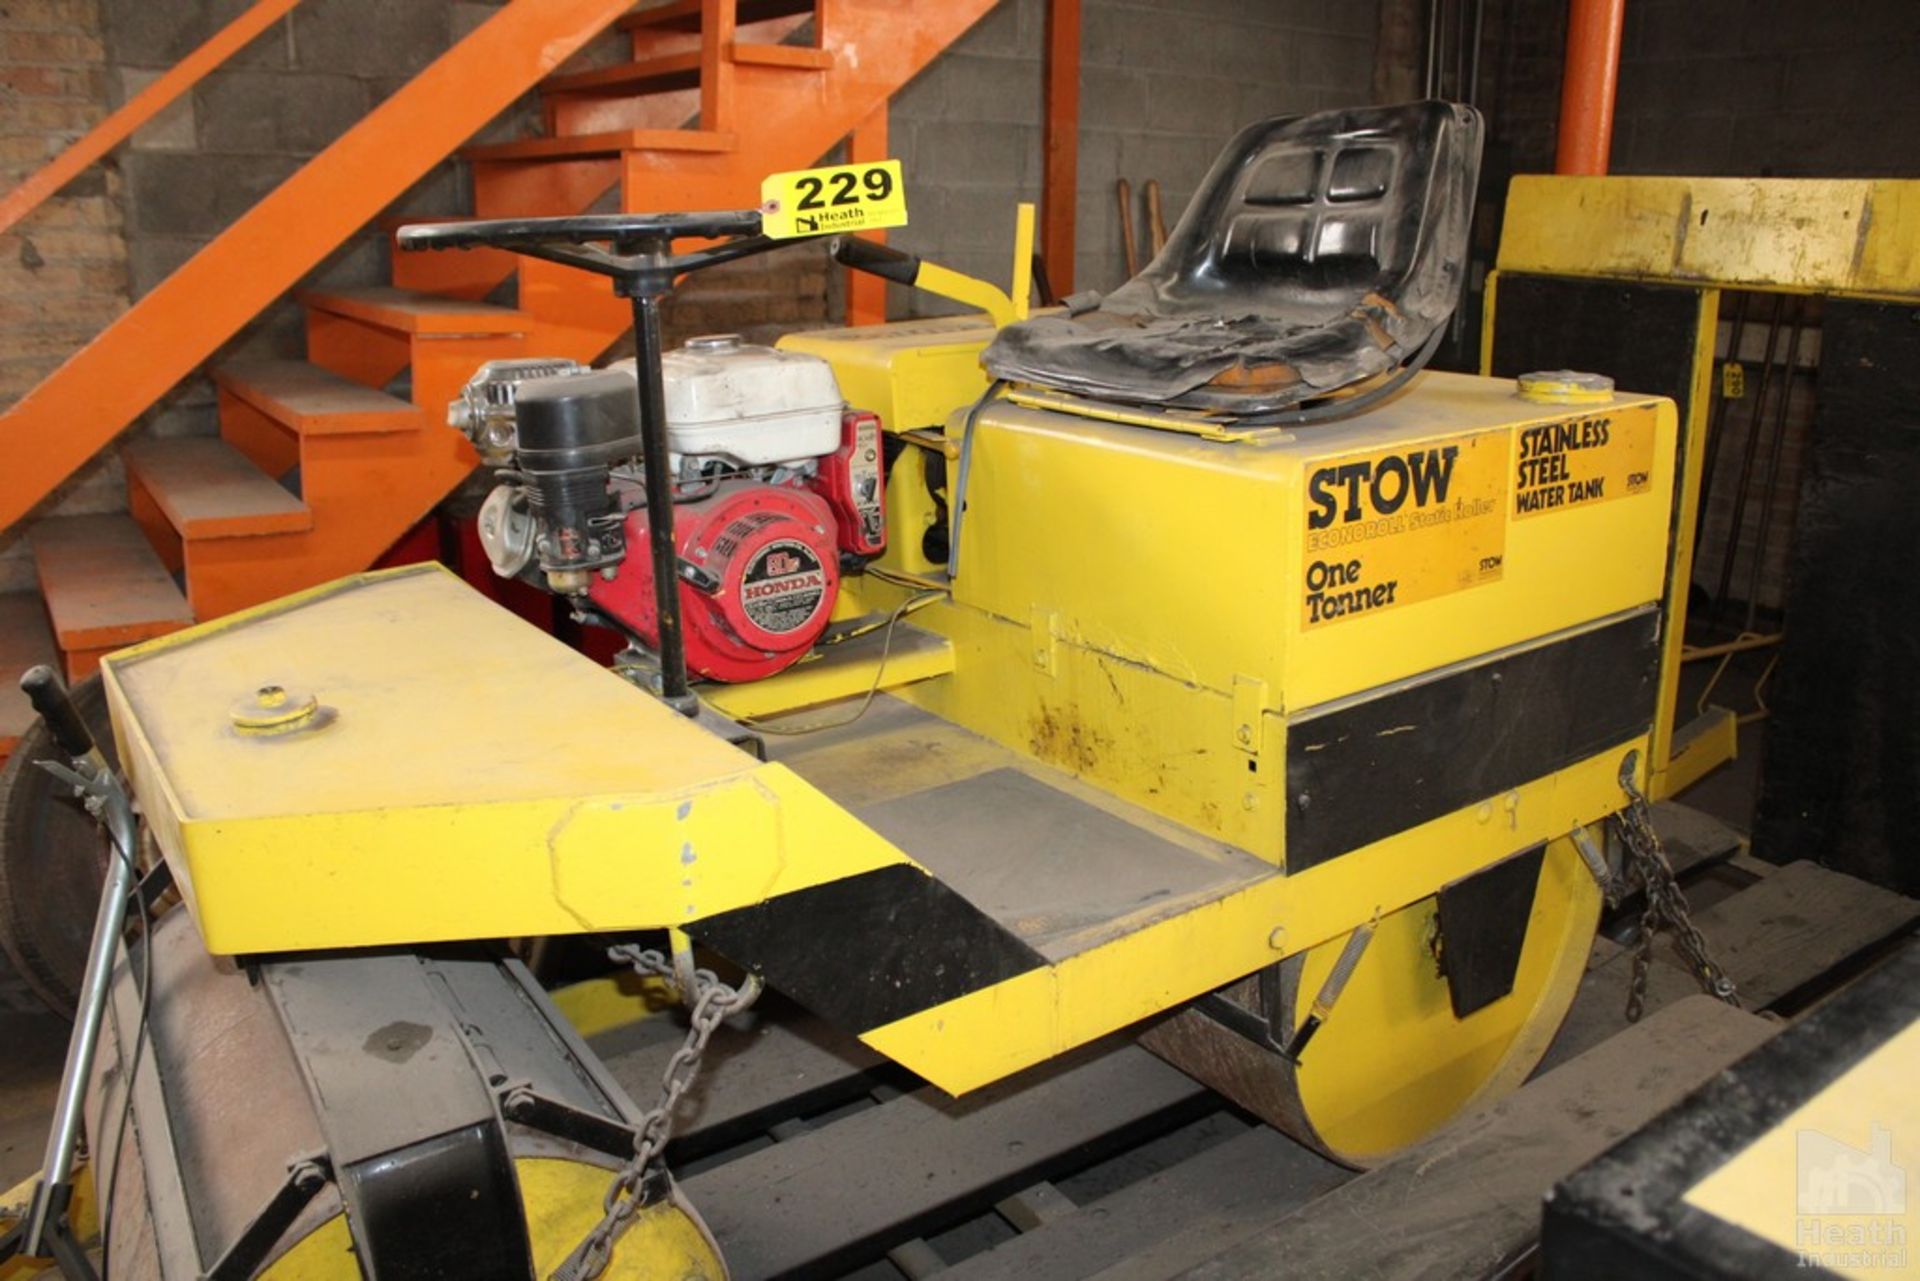 STOW 30" MODEL ECONOROLL STATIC ROLLER ASPHALT ROLLER, ONE TONNER, WITH TRAILER - Image 2 of 7